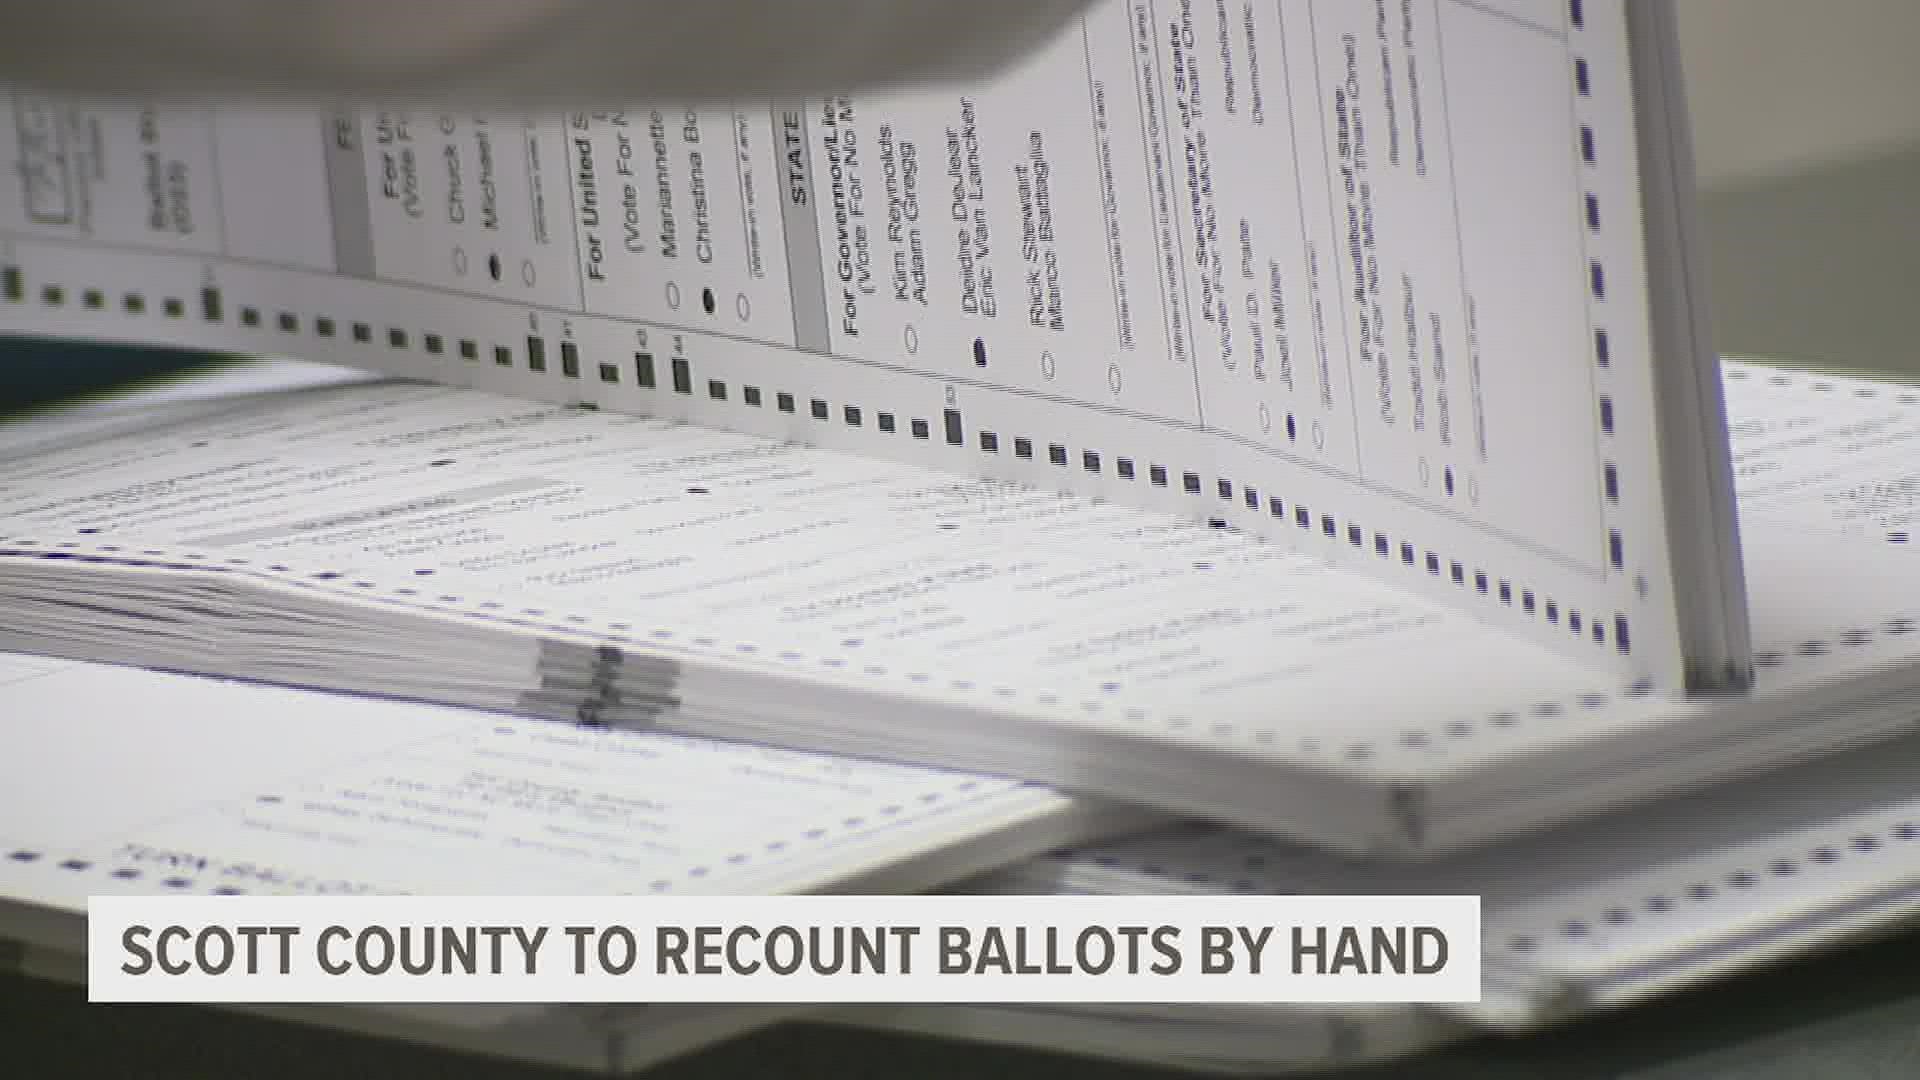 Auditor Kerri Tompkins said that 23,000 absentee ballots need to be recounted after 470 ballots weren't counted in the official total.